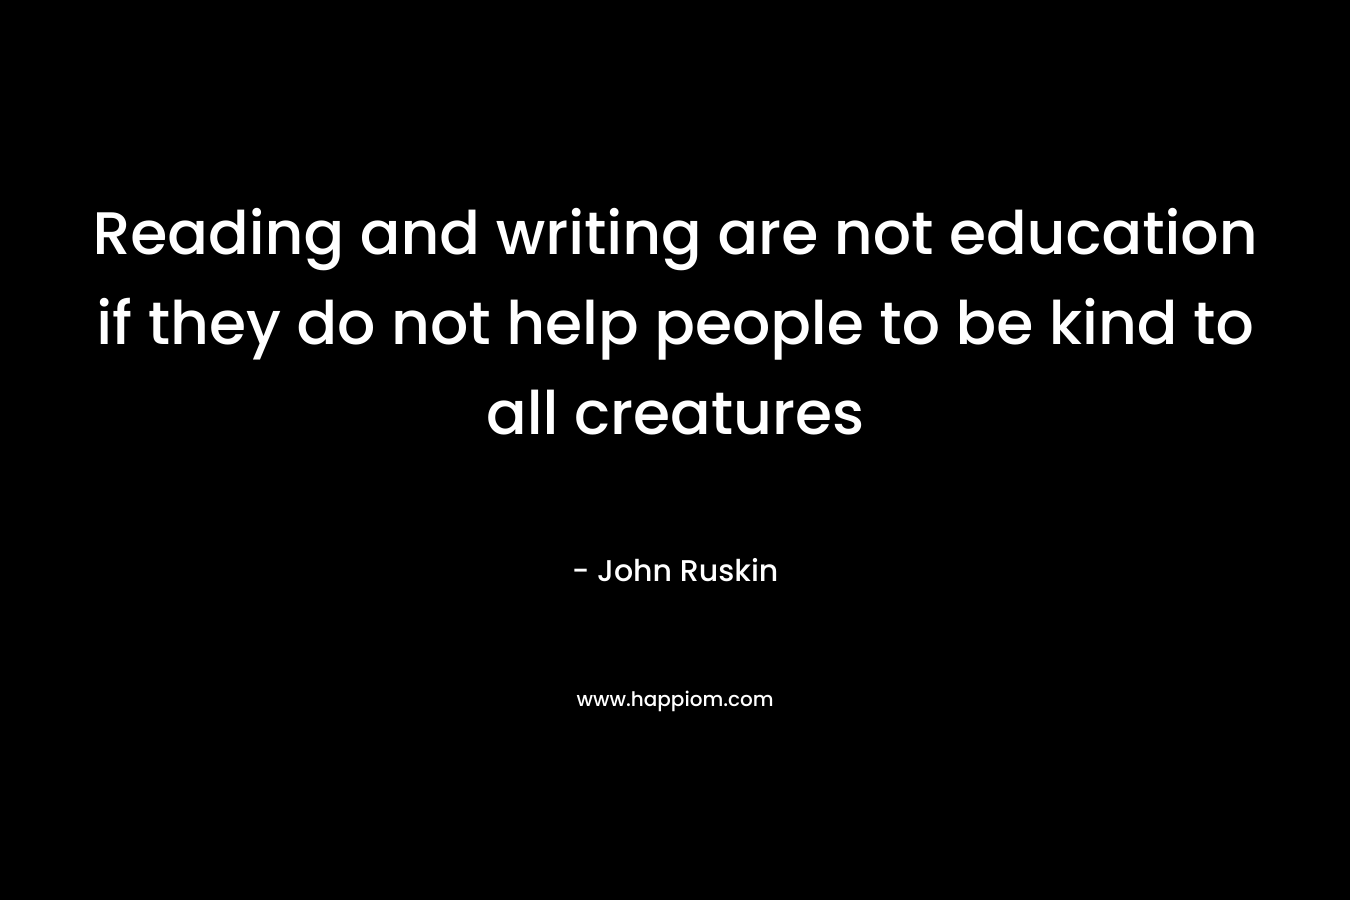 Reading and writing are not education if they do not help people to be kind to all creatures